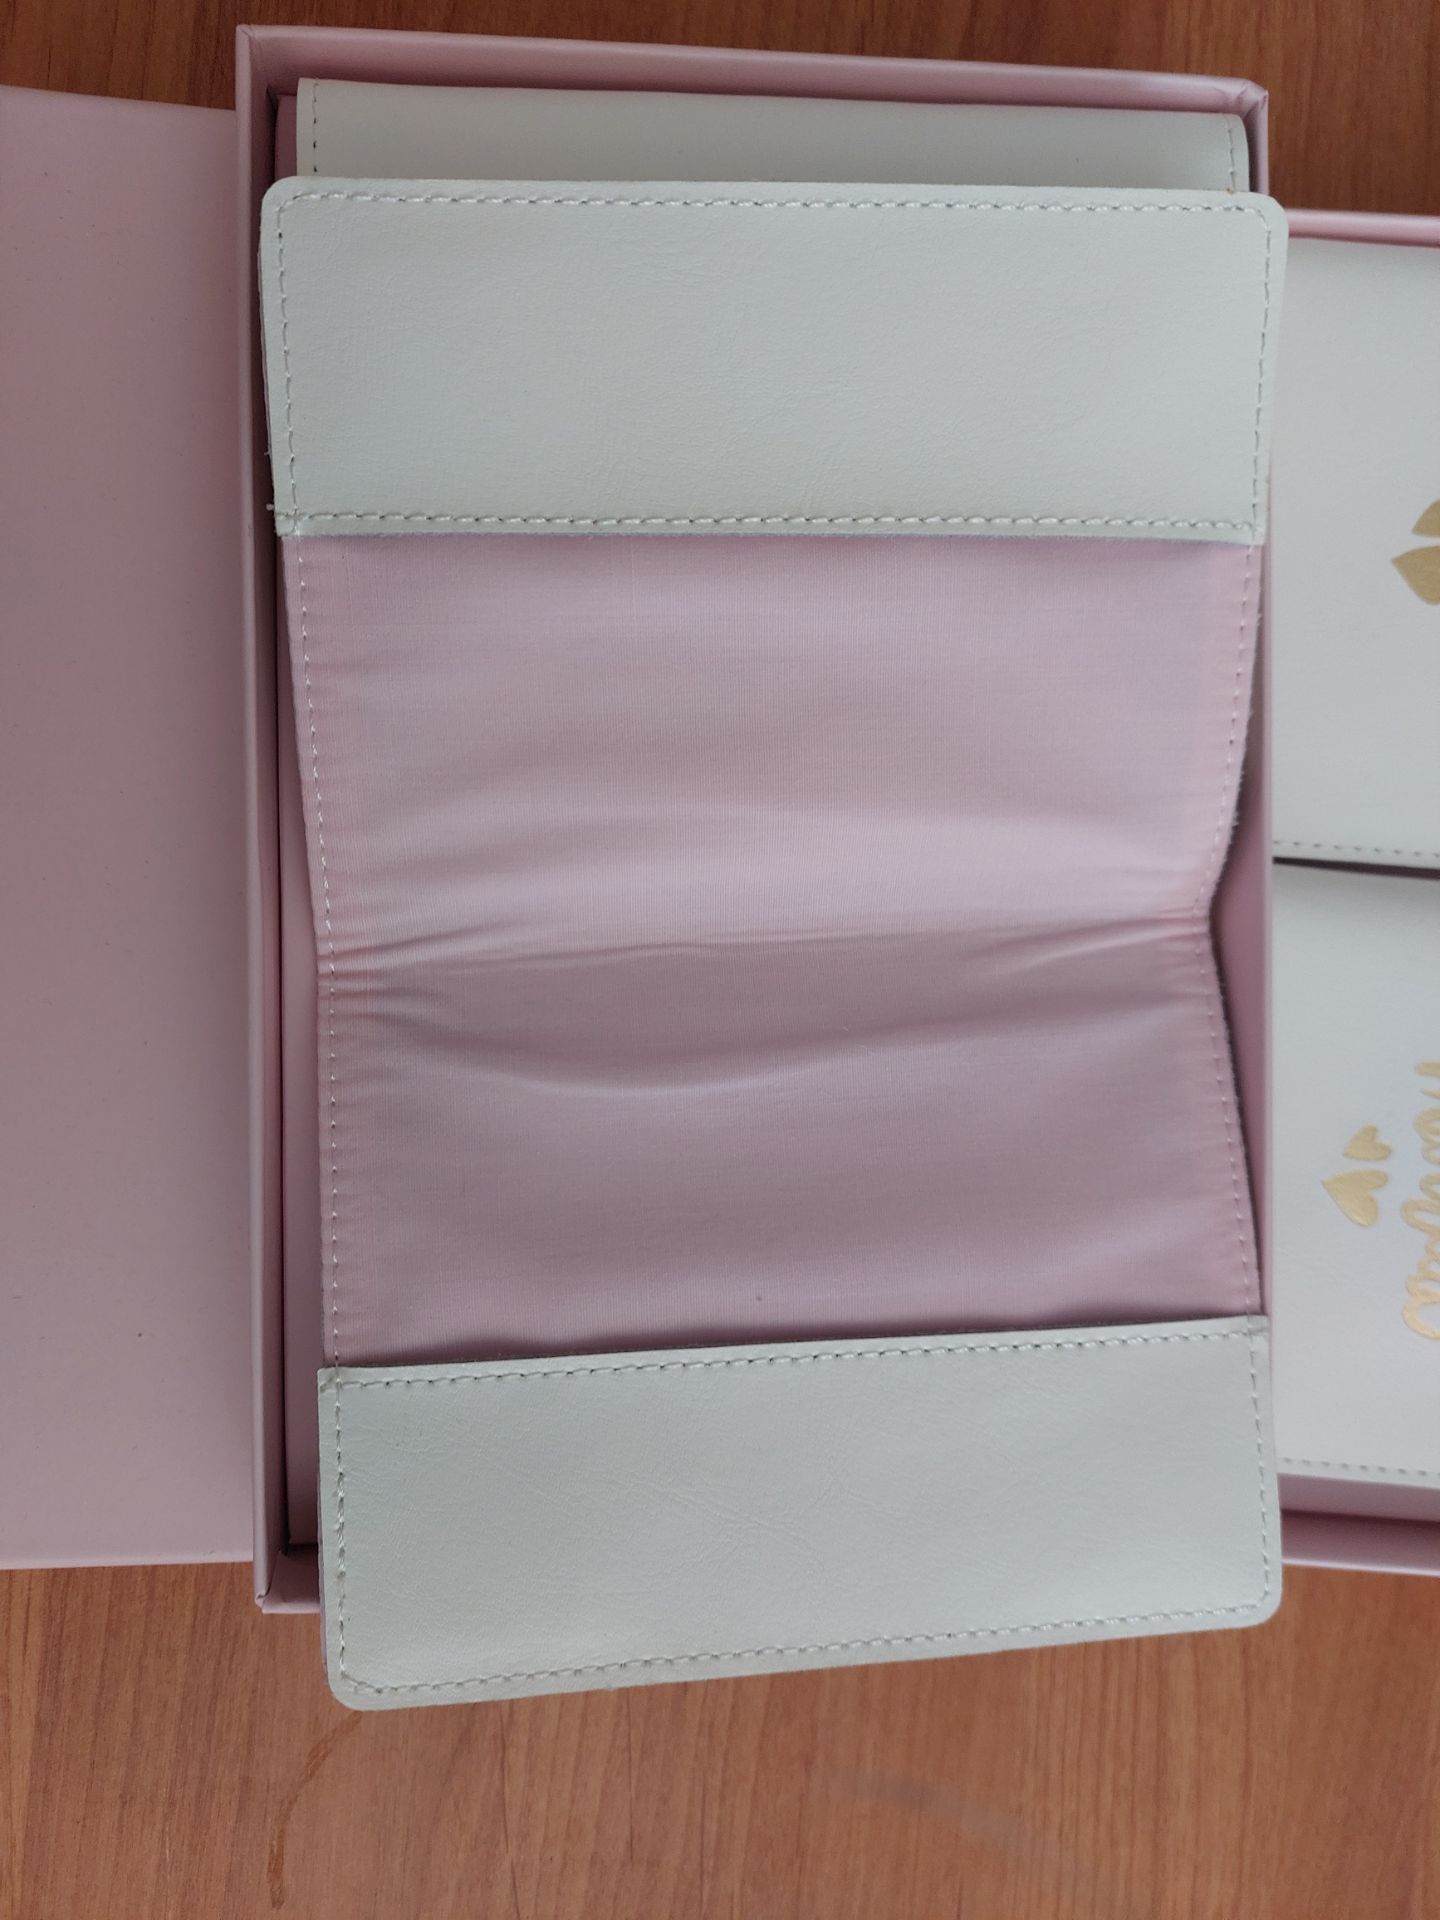 Wedding Passport Covers, 2 Sets of 2 - Image 6 of 6